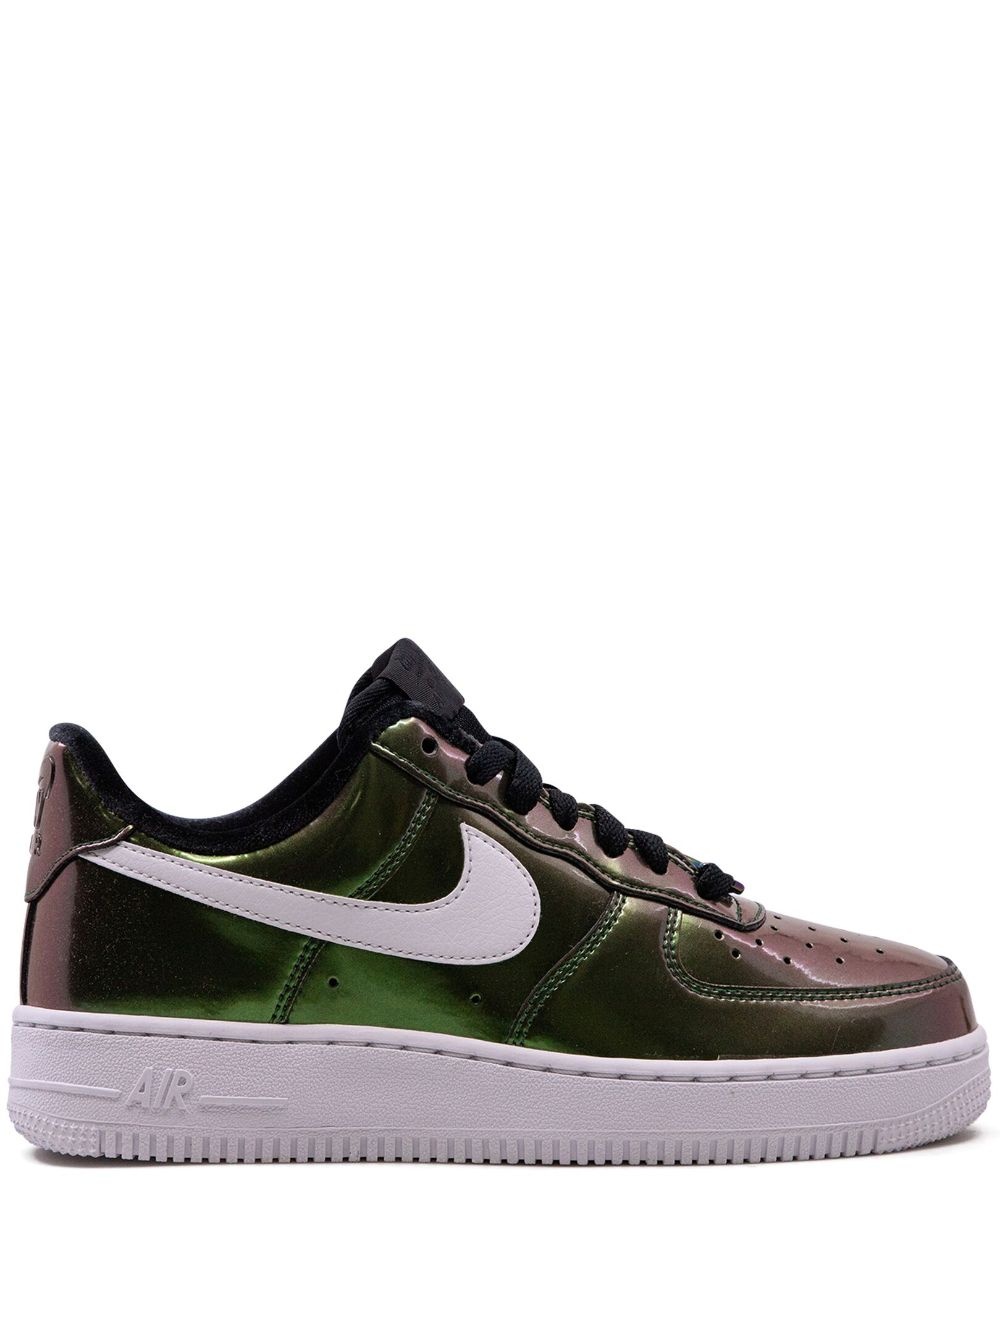 Air Force 1 Low "Iridescent" sneakers - 1